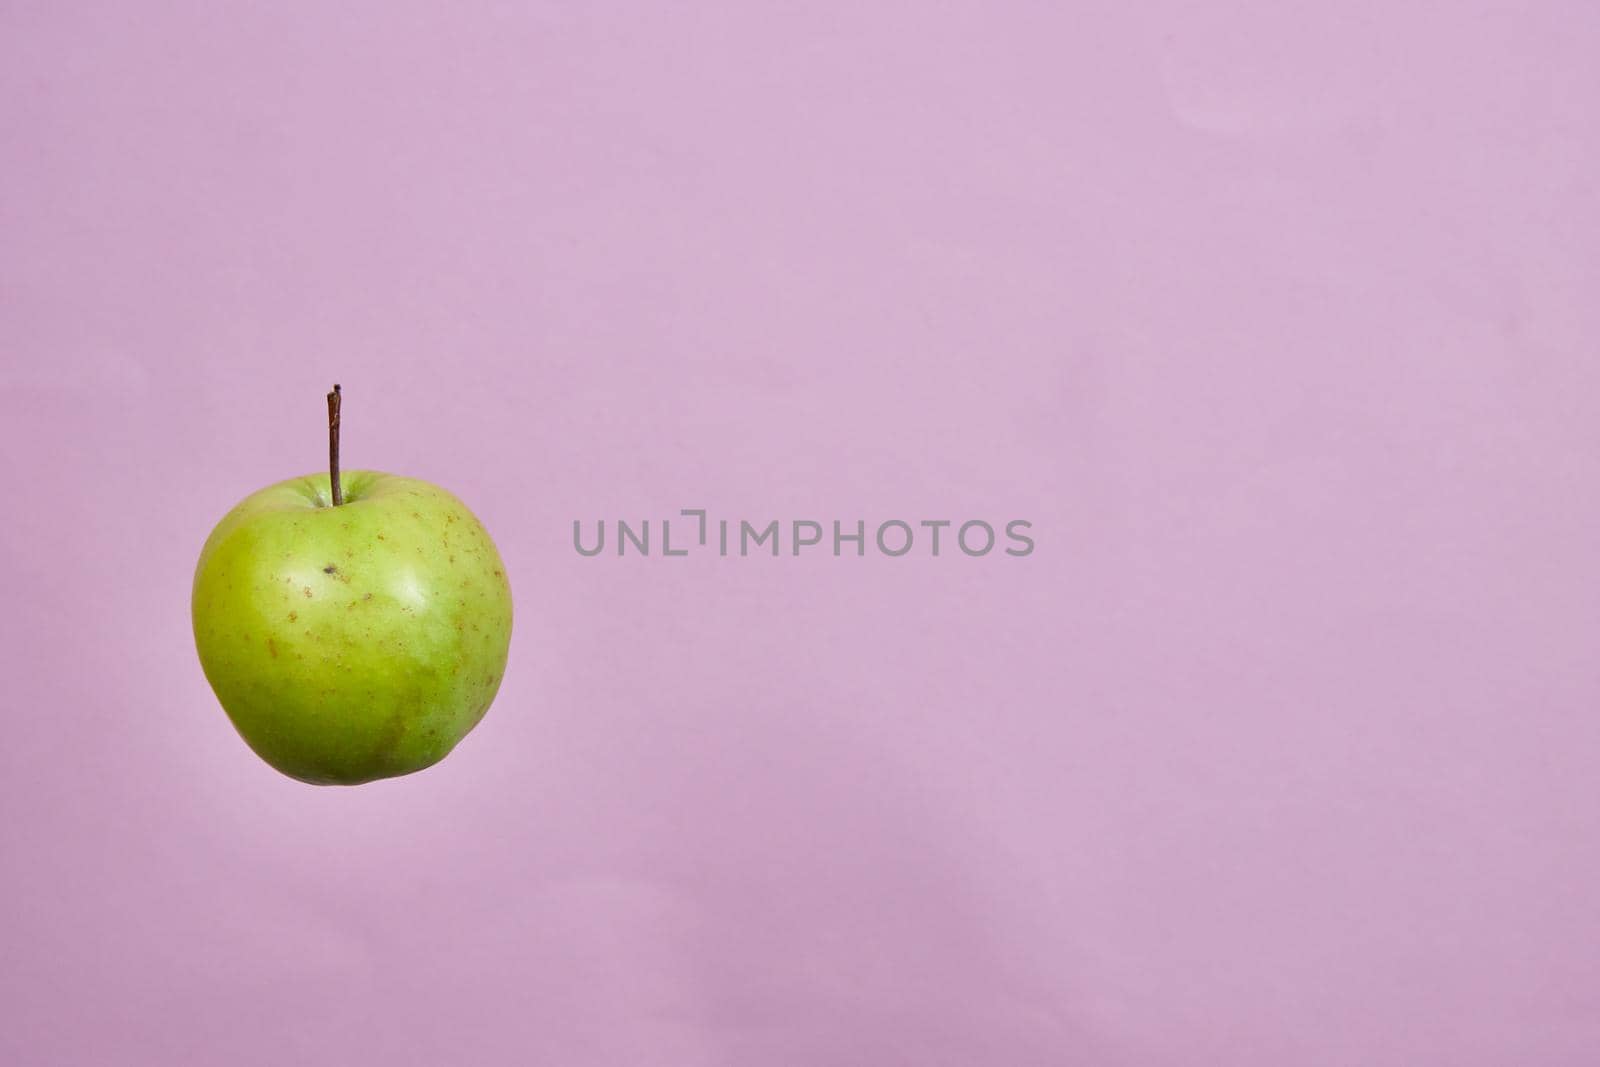 three green apples spinning on a pink background.